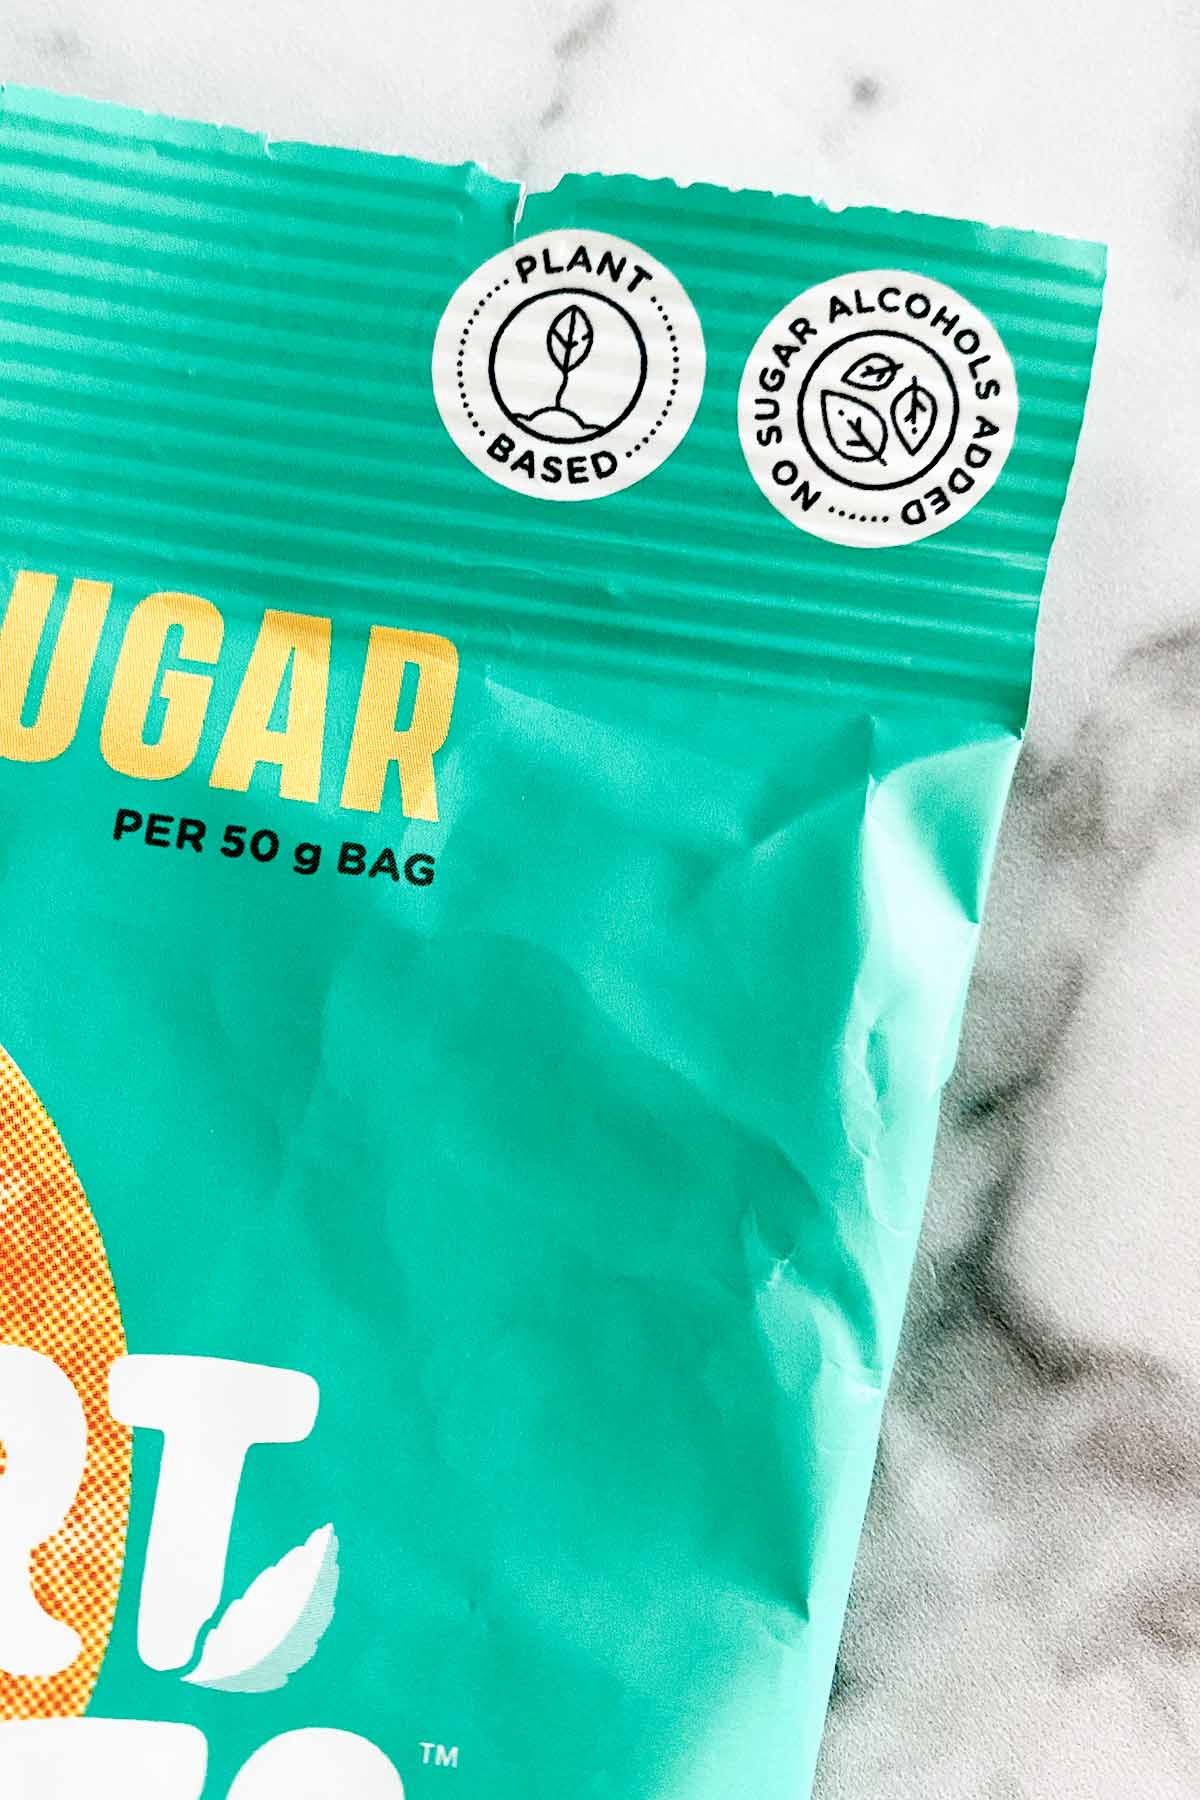 close-up of a package of Smart Sweets vegan gummies package, showing the white circle that says Plant Based inside it.